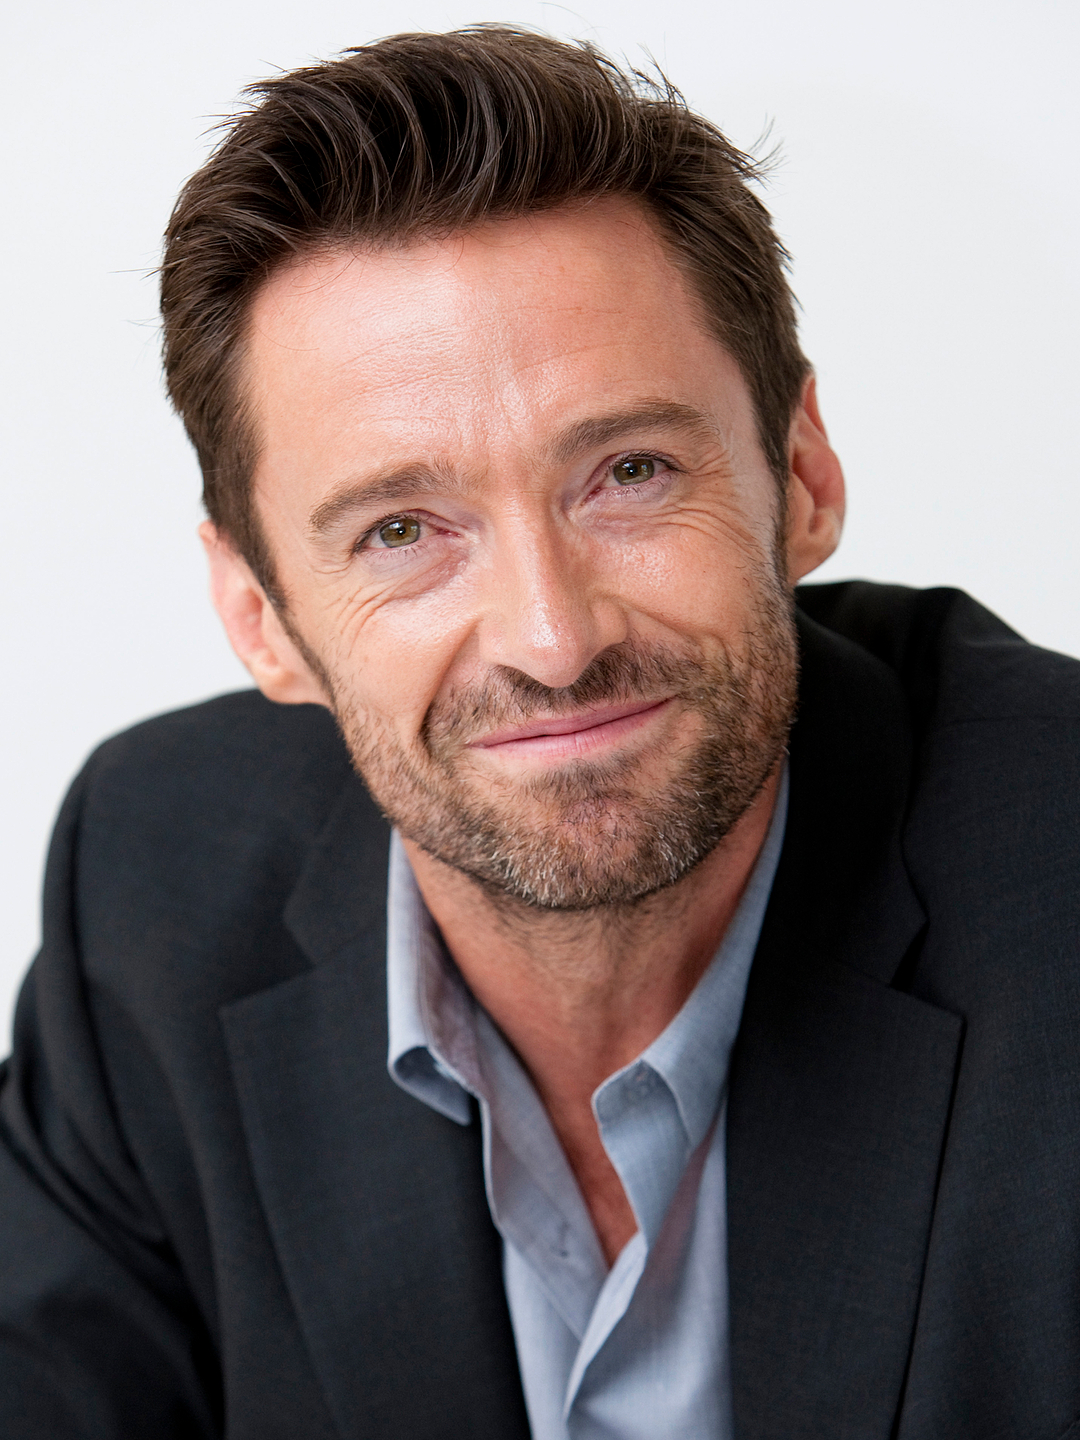 Hugh Jackman who is his father